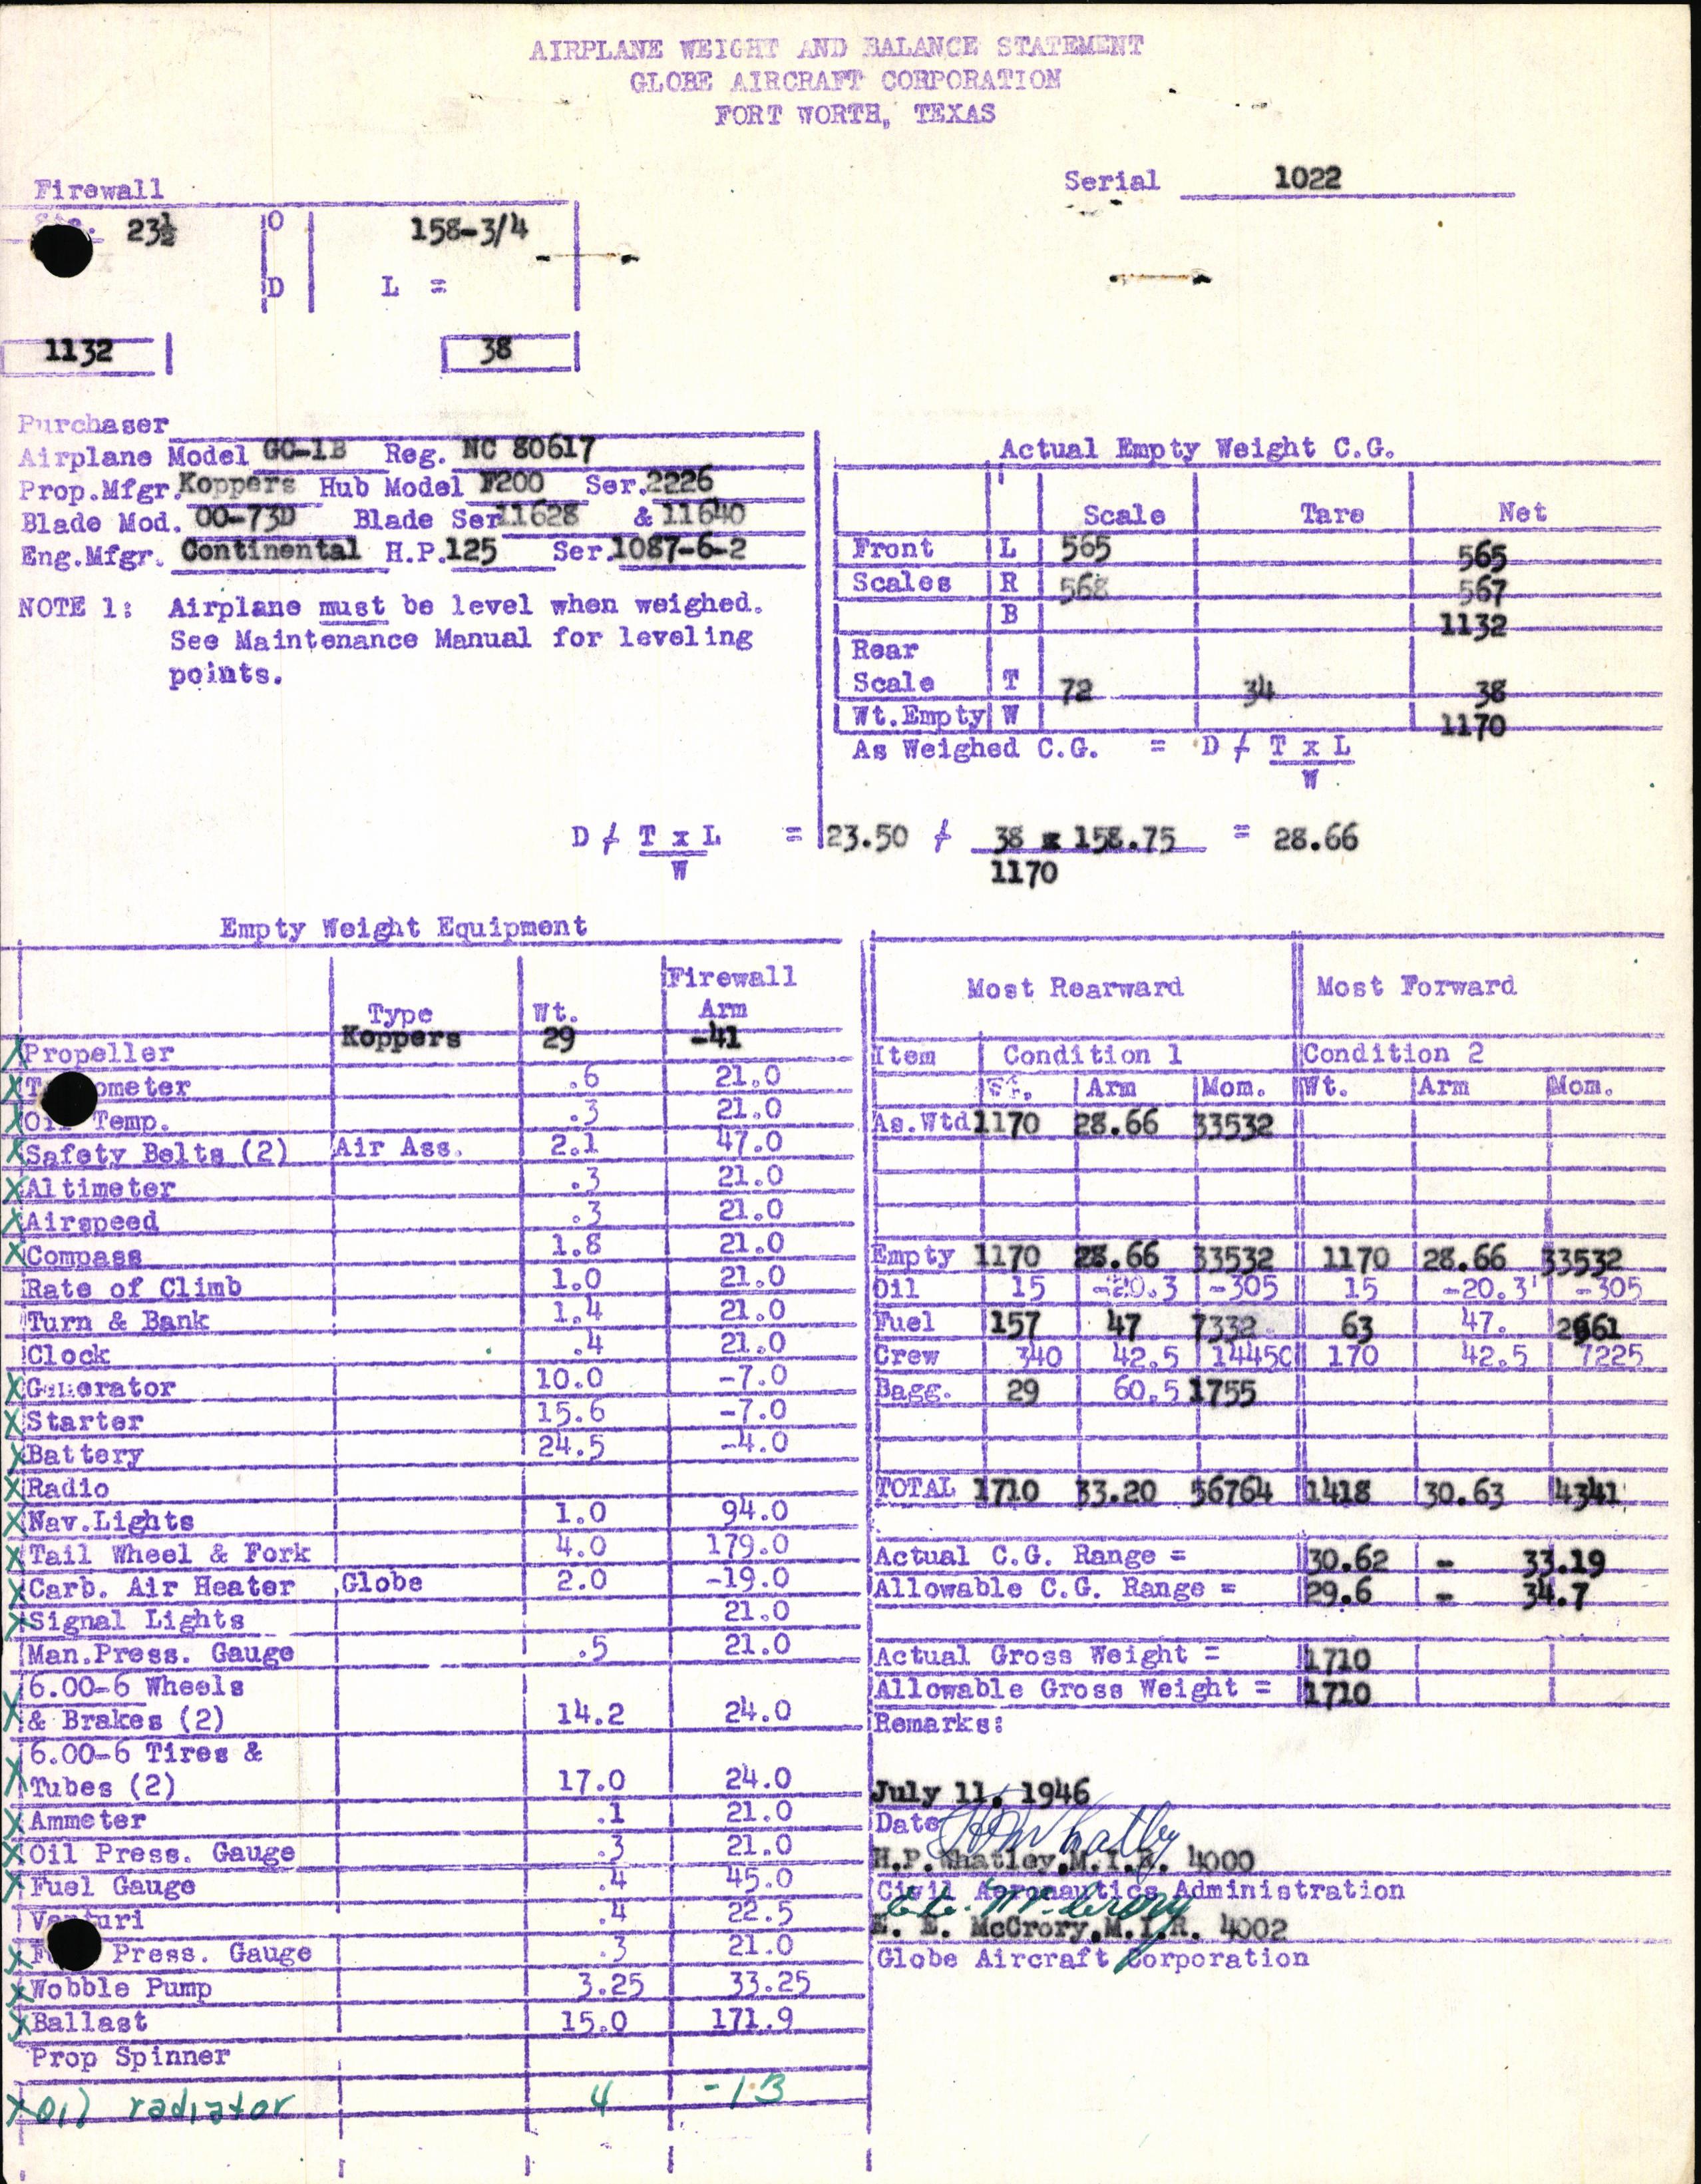 Sample page 5 from AirCorps Library document: Technical Information for Serial Number 1022